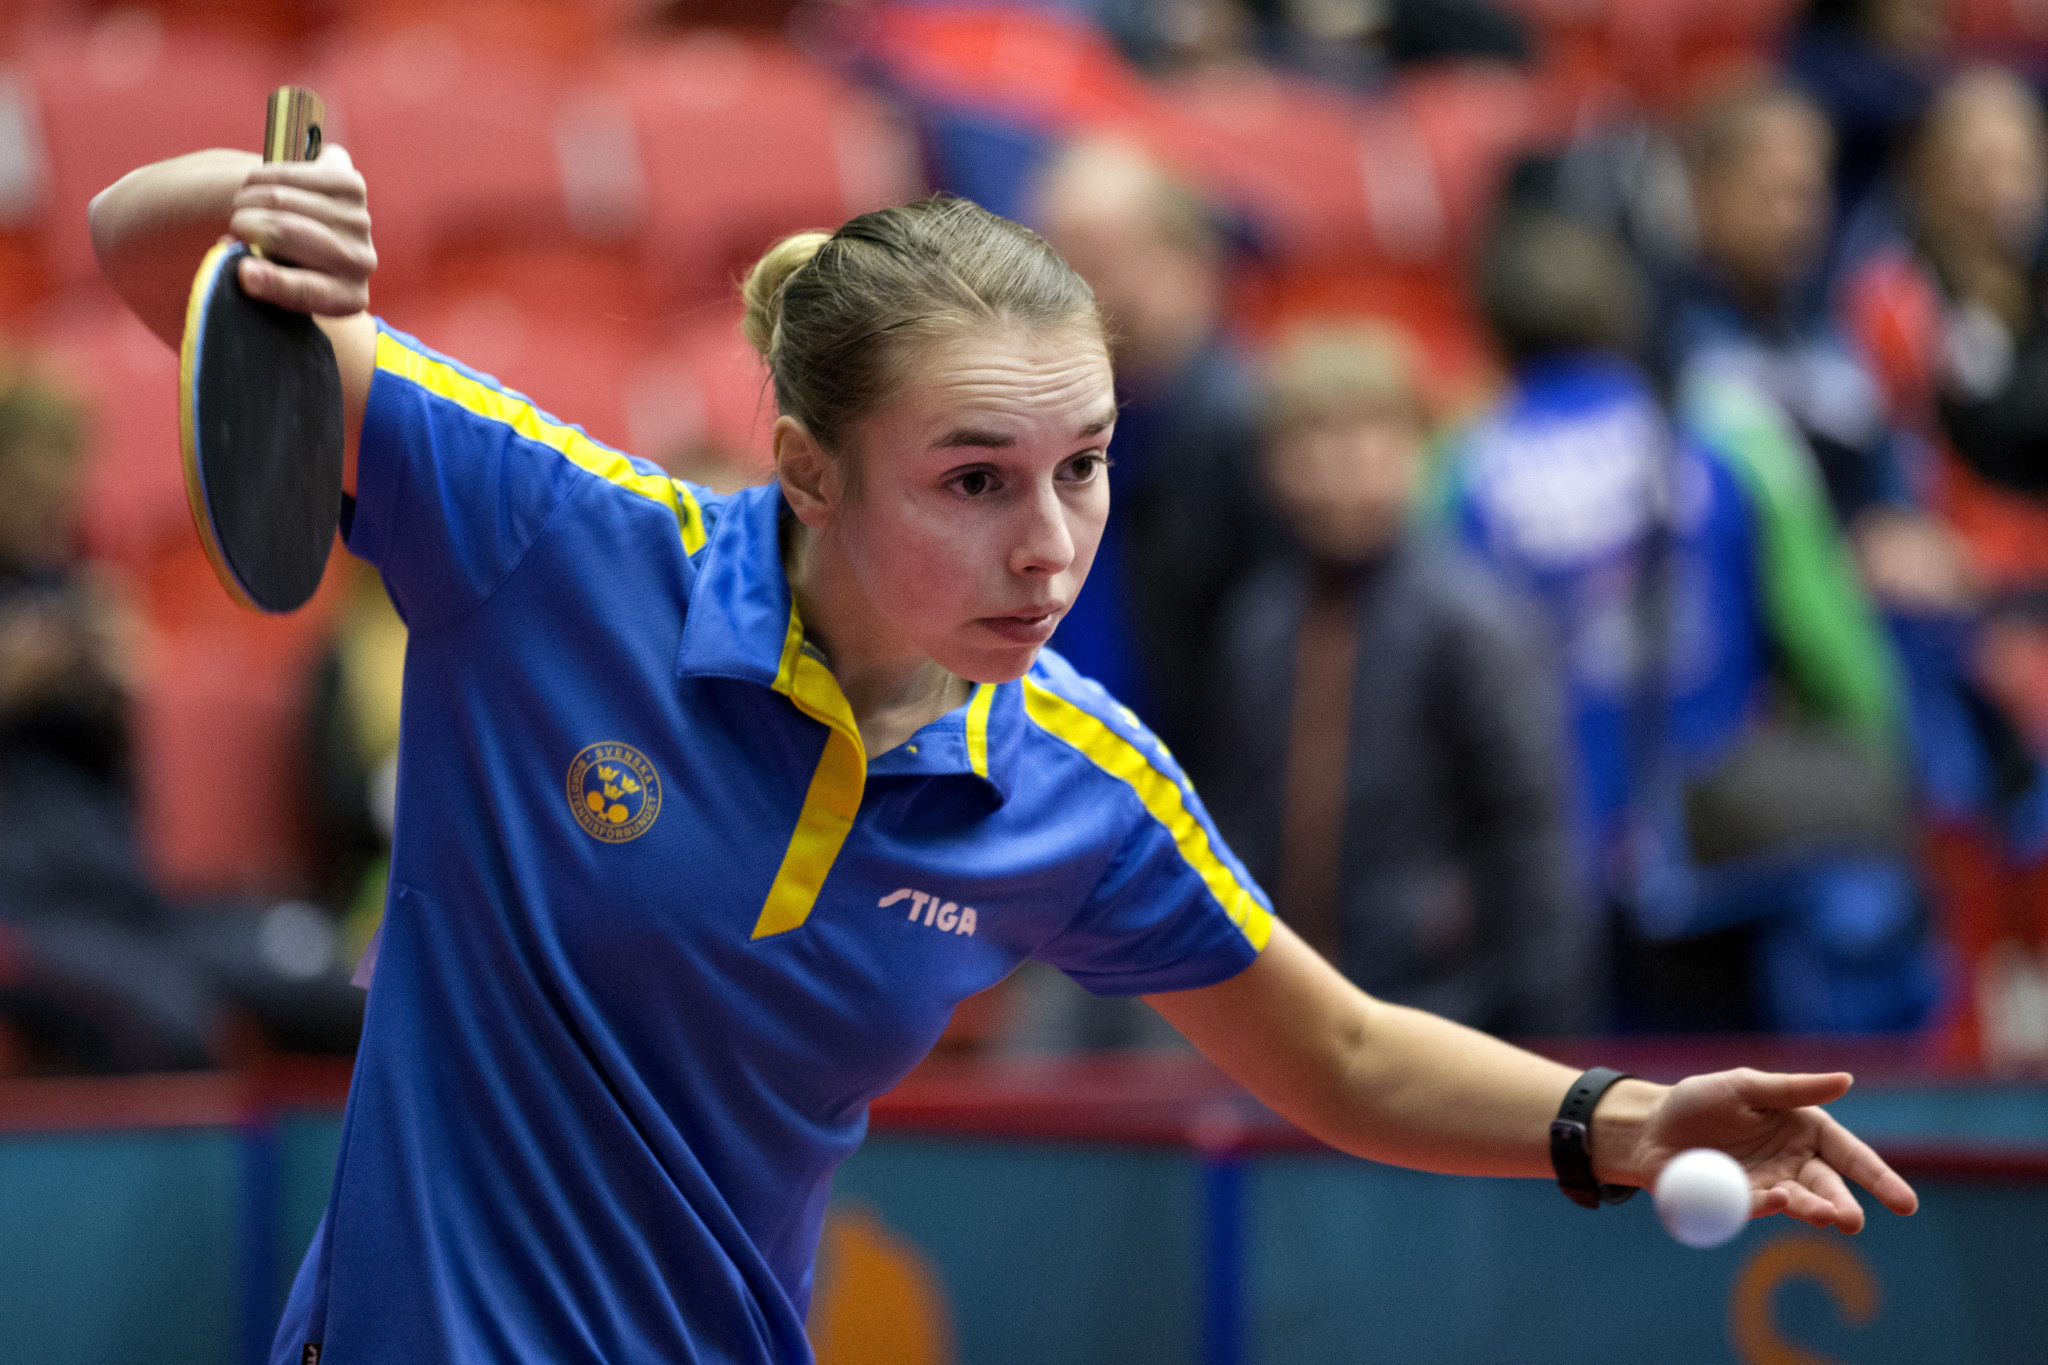 Linda Bergstrom is one of four female table tennis players to book their place at Tokyo 2020 today ©Getty Images